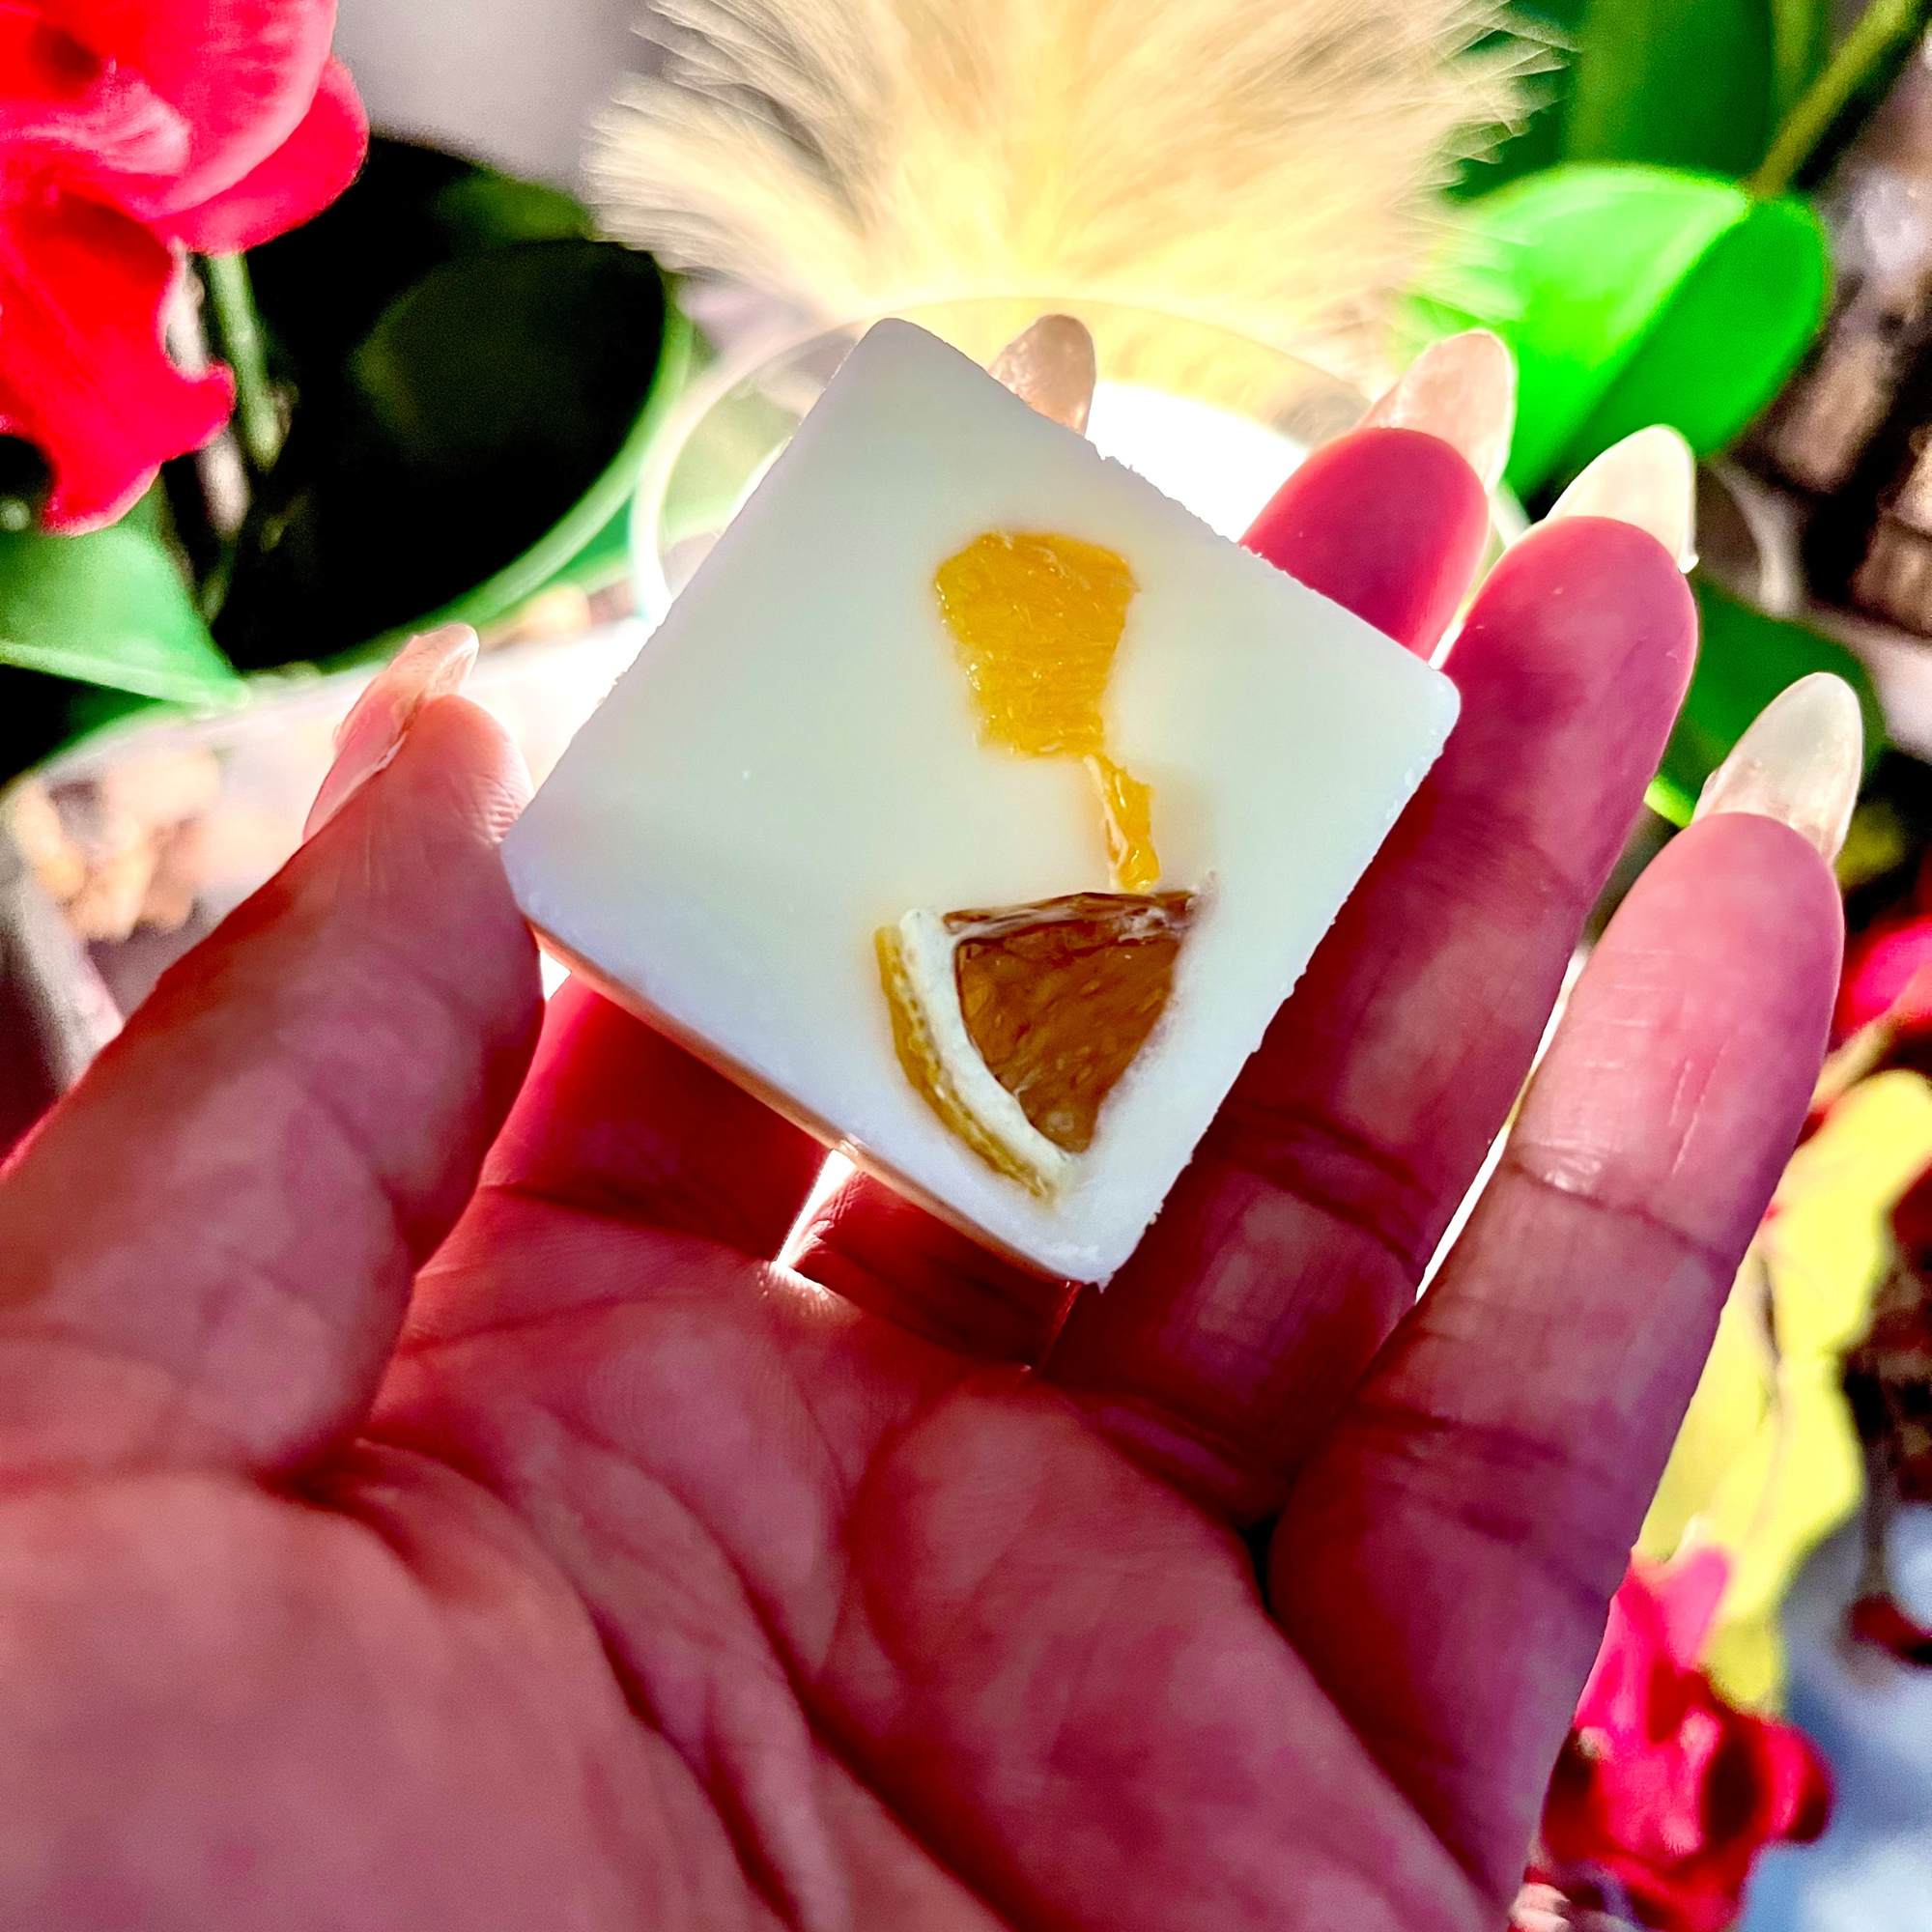 Alchemy7 | Citrus Sol Wax Melts: Radiant Energy Cleanse for Your Space